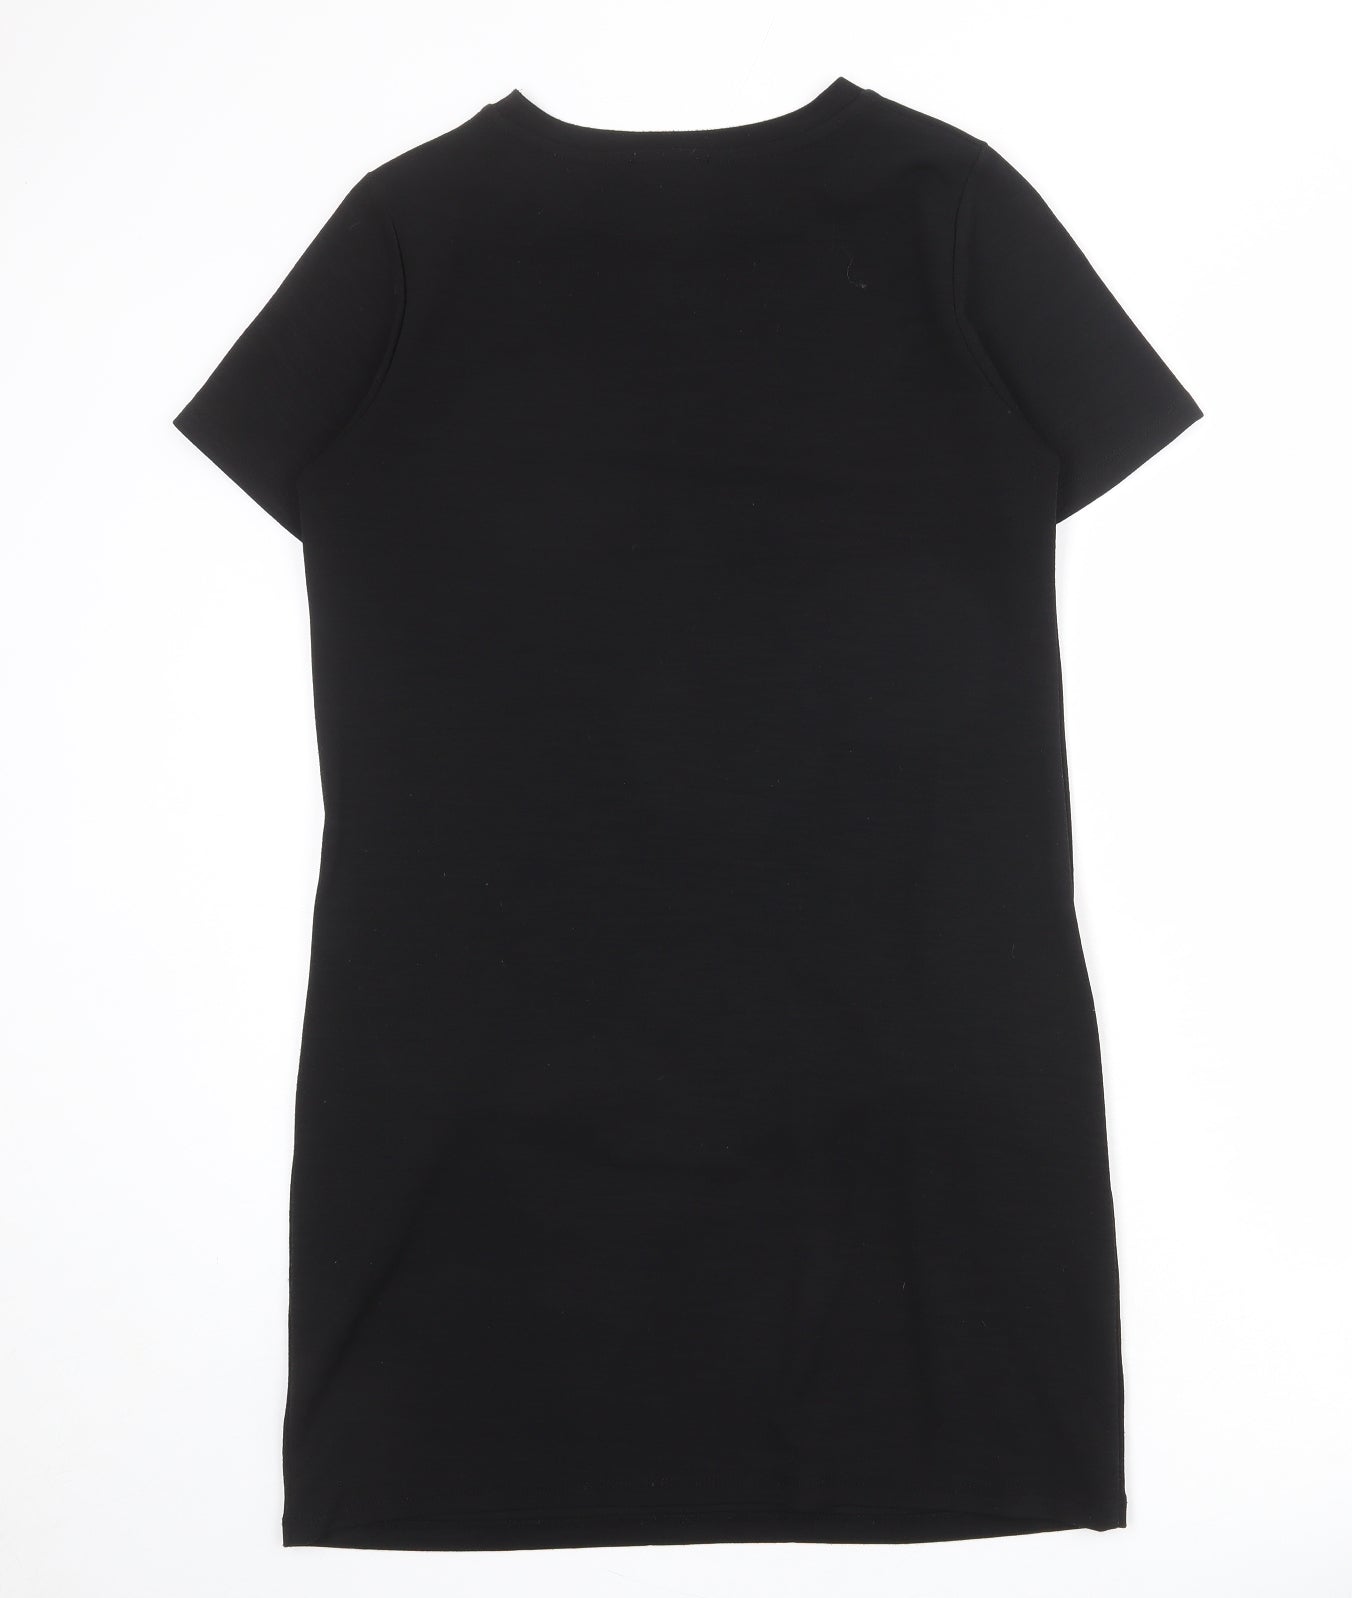 New Look Womens Black Polyester Shift Size 10 Round Neck Pullover